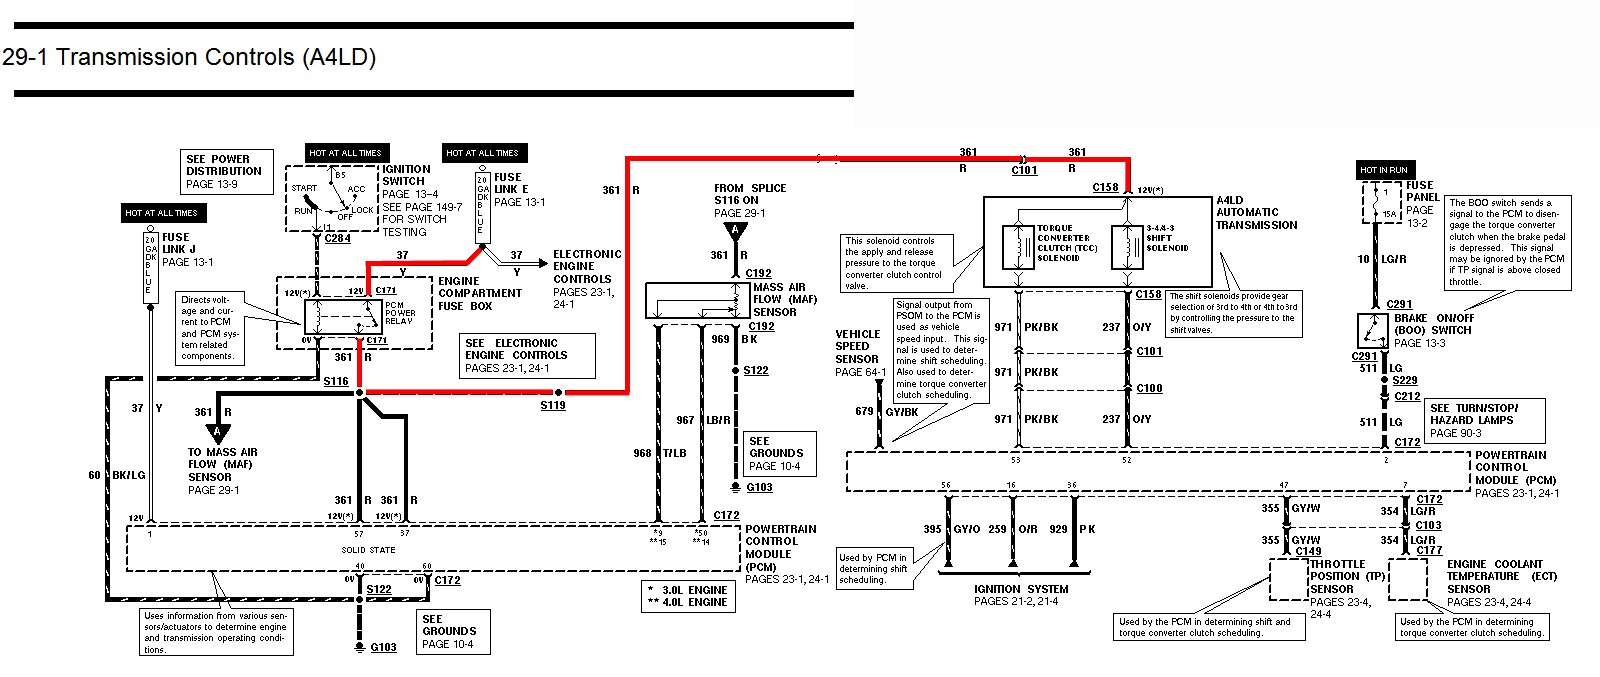 1994 ford F150 Wiring Diagram Here Not Below for Fullsize Version